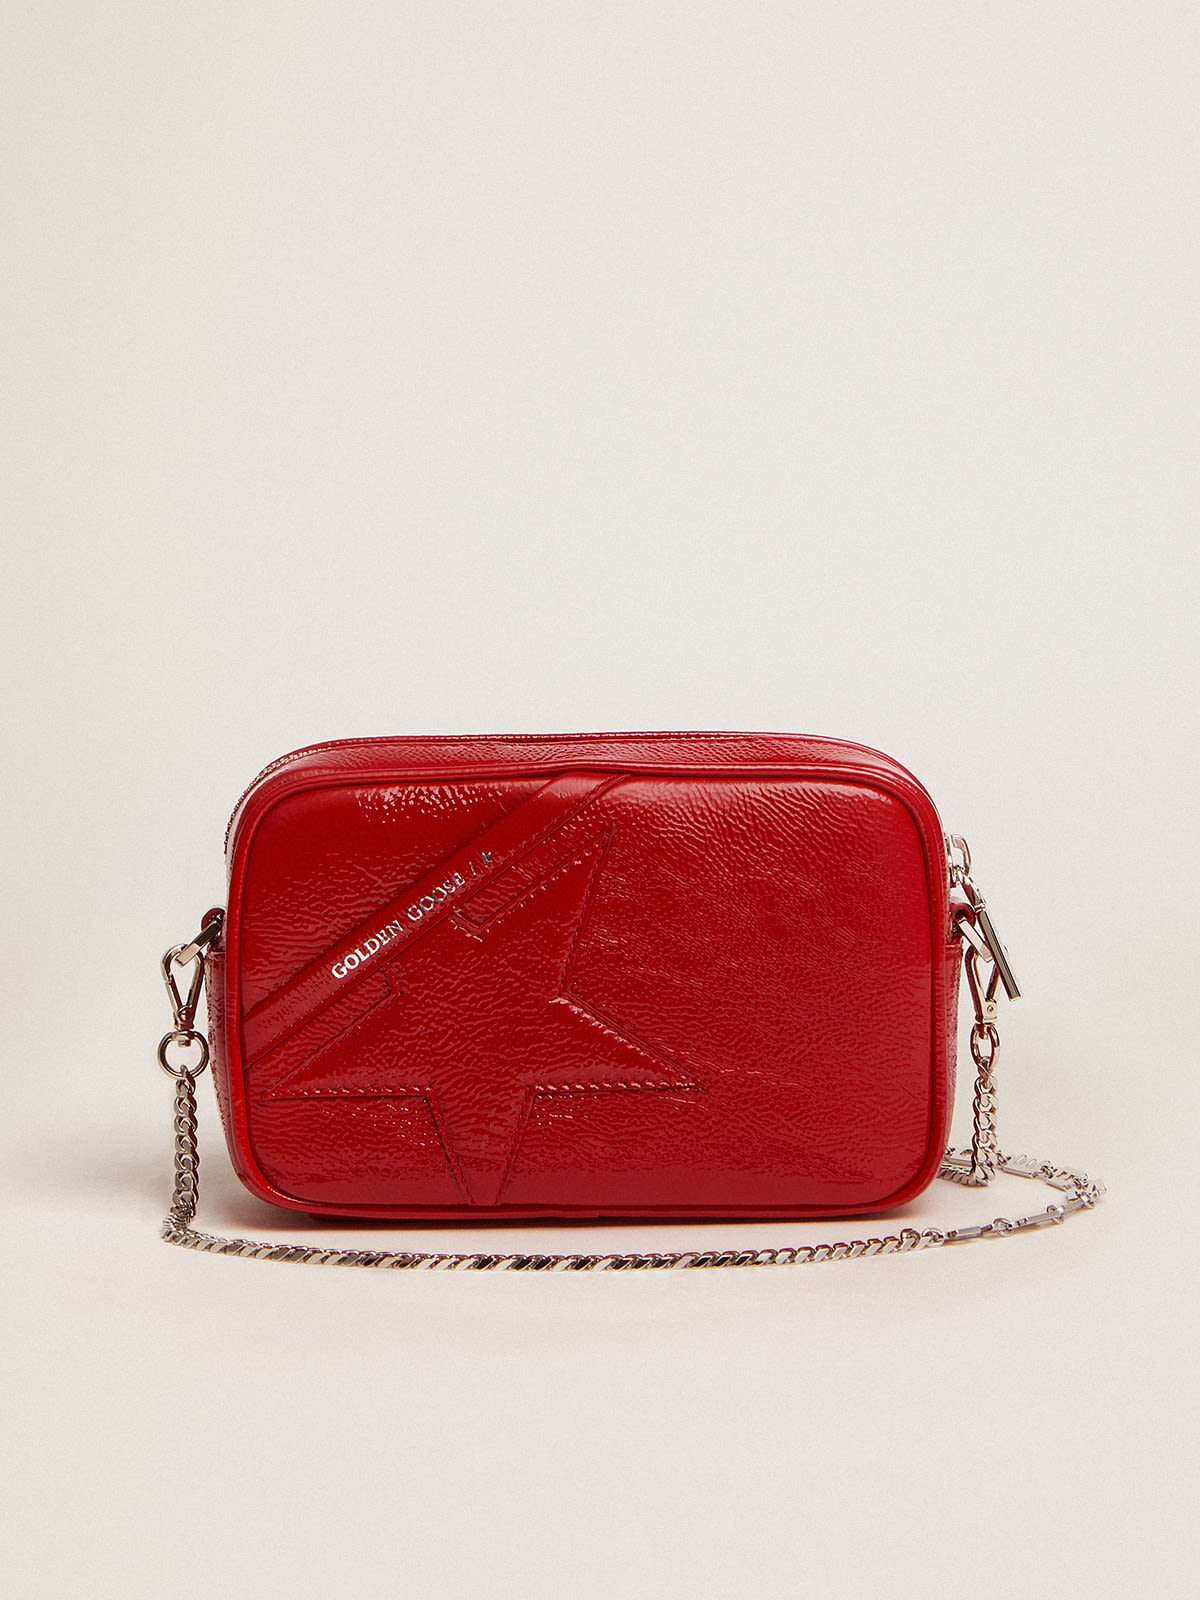 Golden Goose - Women's Mini Star Bag in red painted leather with tone-on-tone star in 